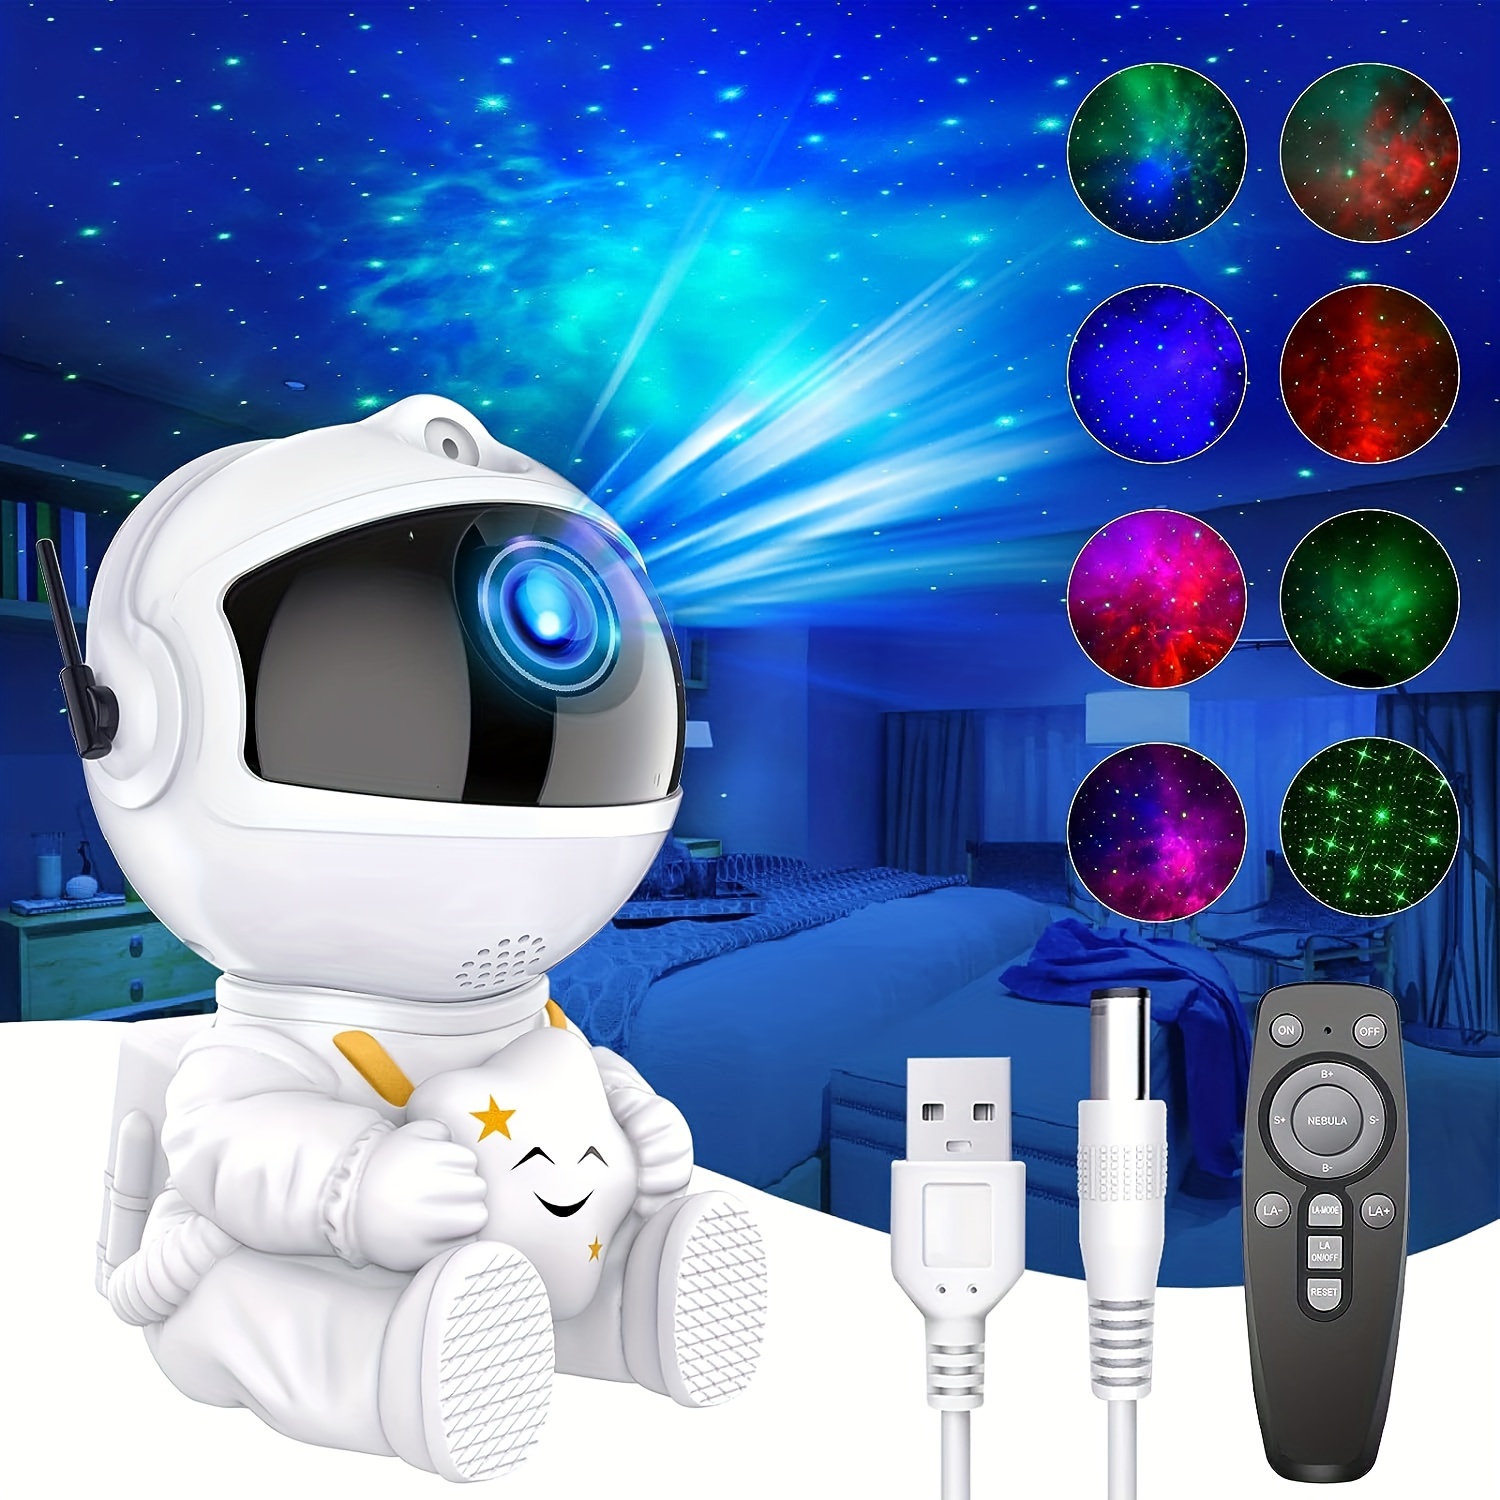 NEW UFO LED Star Projector Night Light 8 in 1 Planetarium Projection Galaxy  Starry Sky Projector Lamp for Kids Gift Room Decor